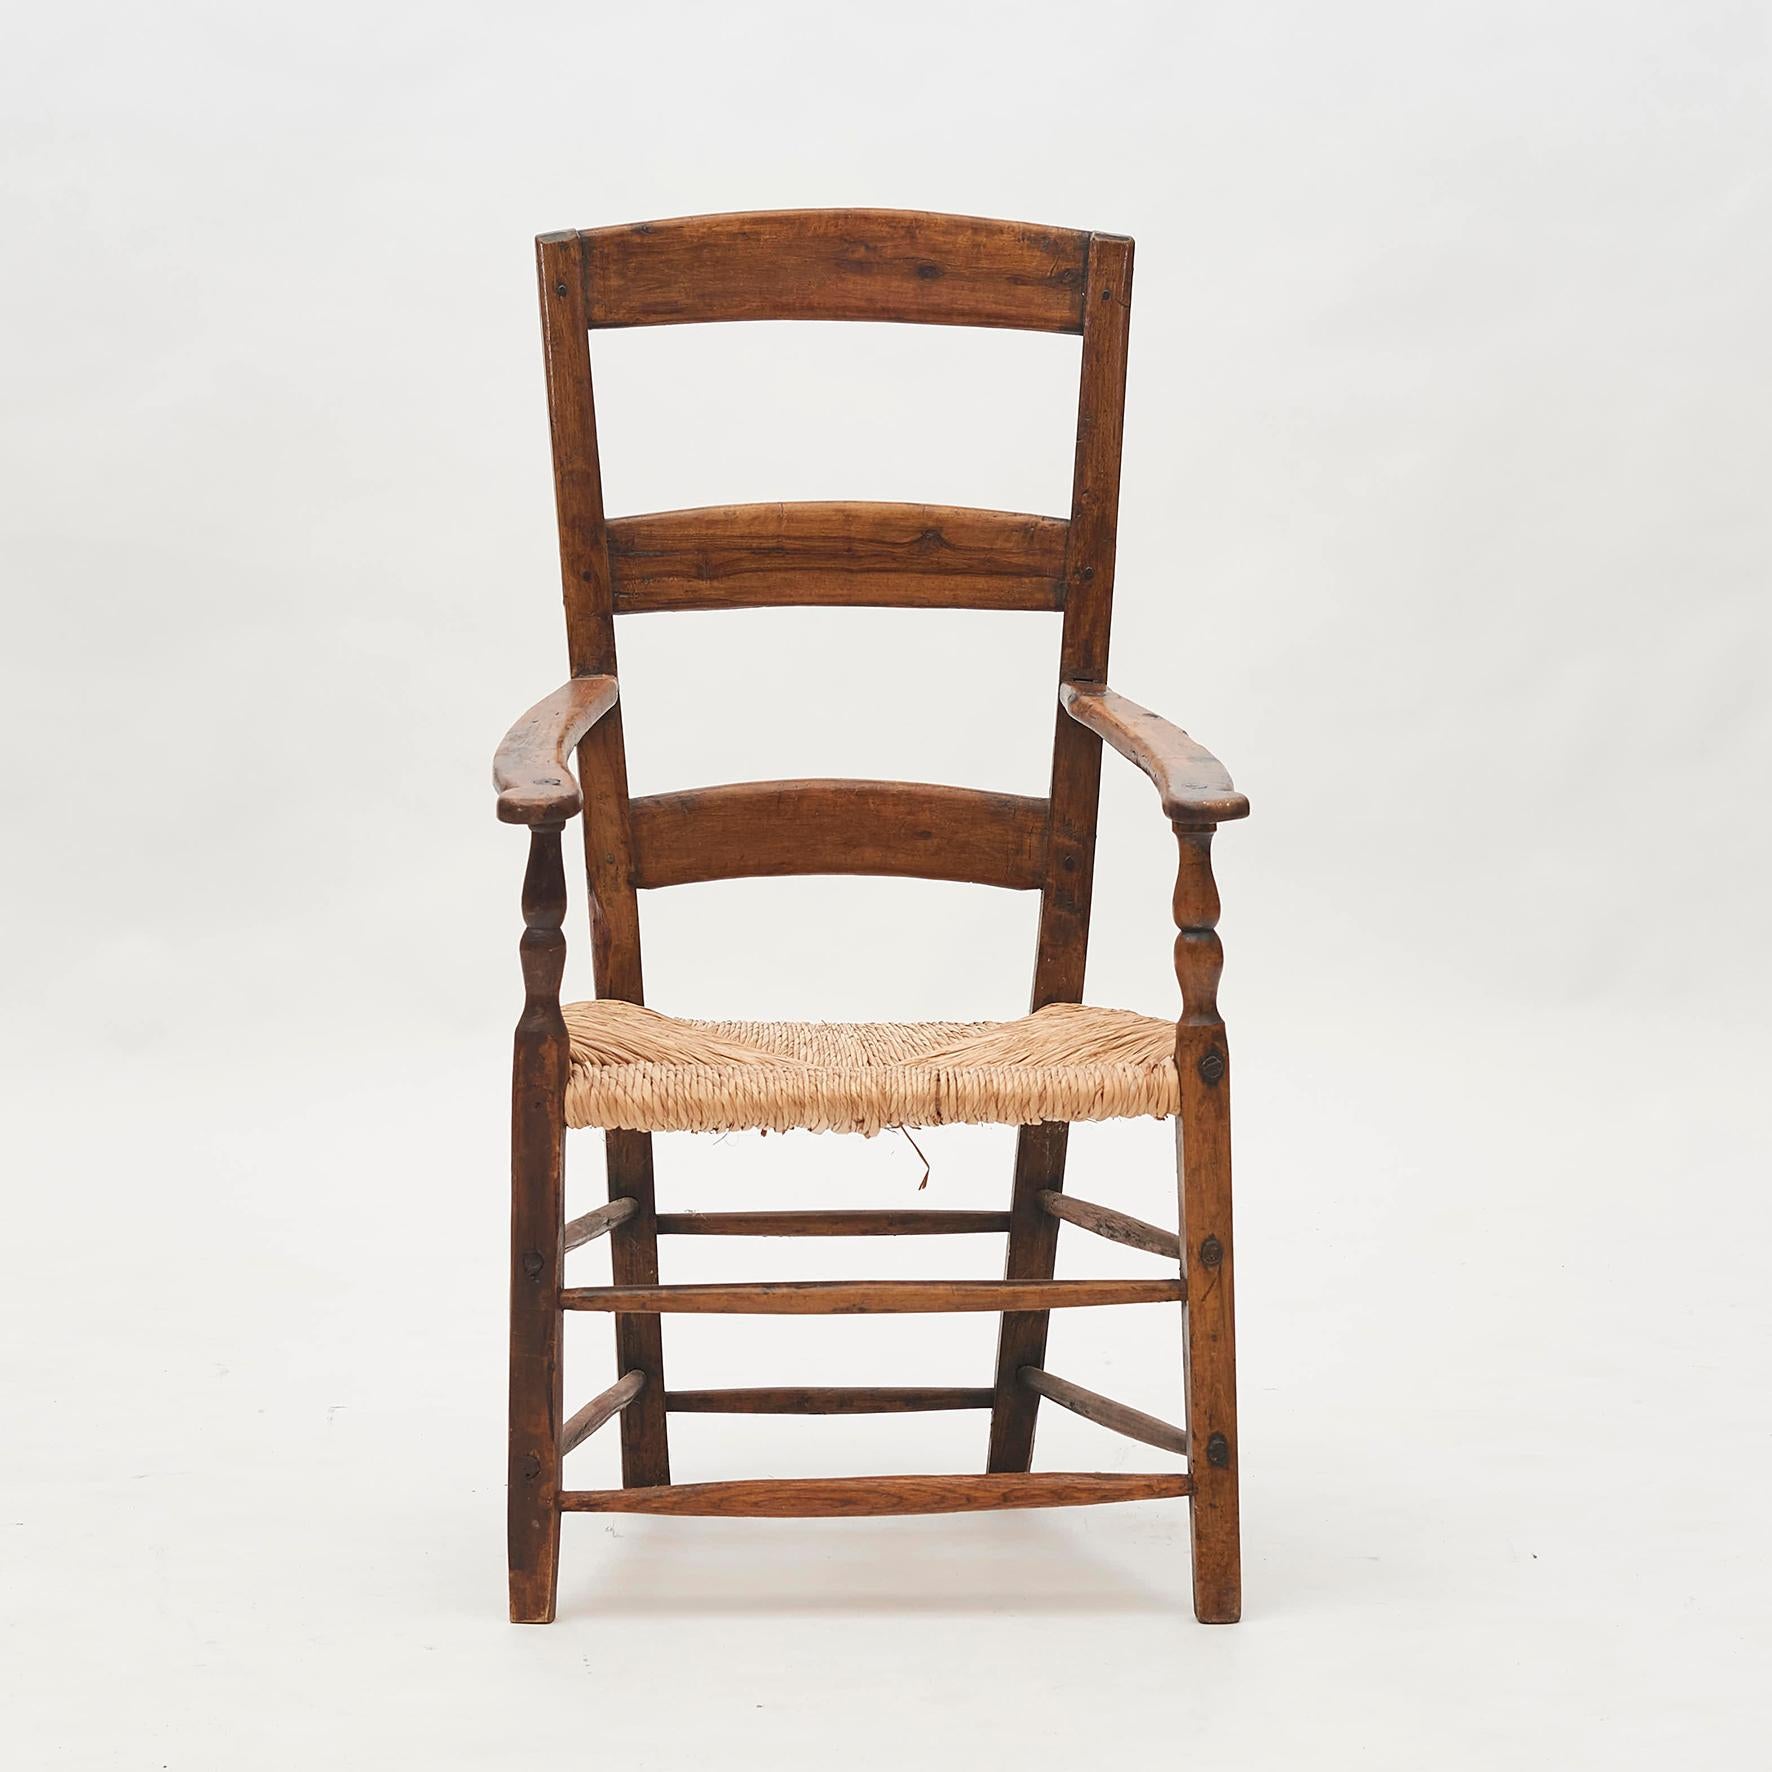 Fine example of English ladder back armchair in Yew wood. England, early 18th century. Appears untouched with beautiful original patina. The seat is a hand woven rush seat and very sturdy. The seat is of later date than the rest of the chair. The